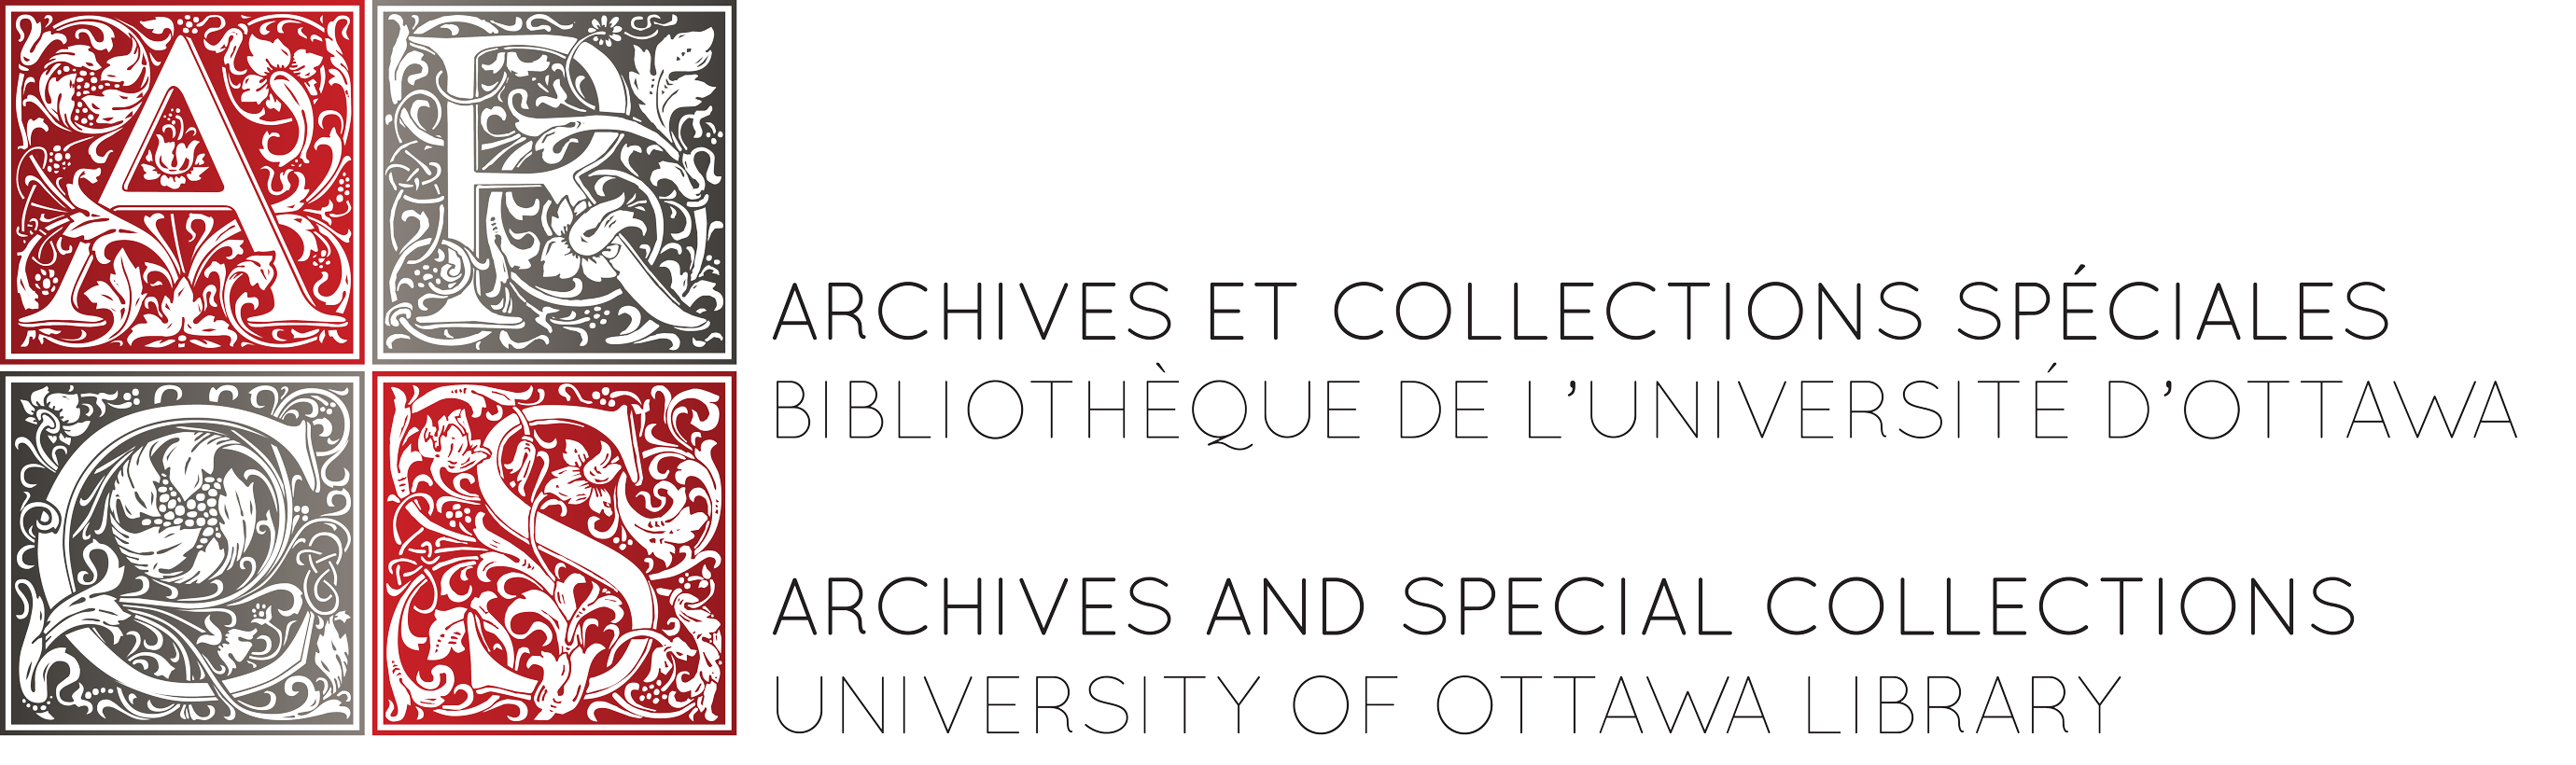 University of Ottawa Library, Archives and Special Collections Logo